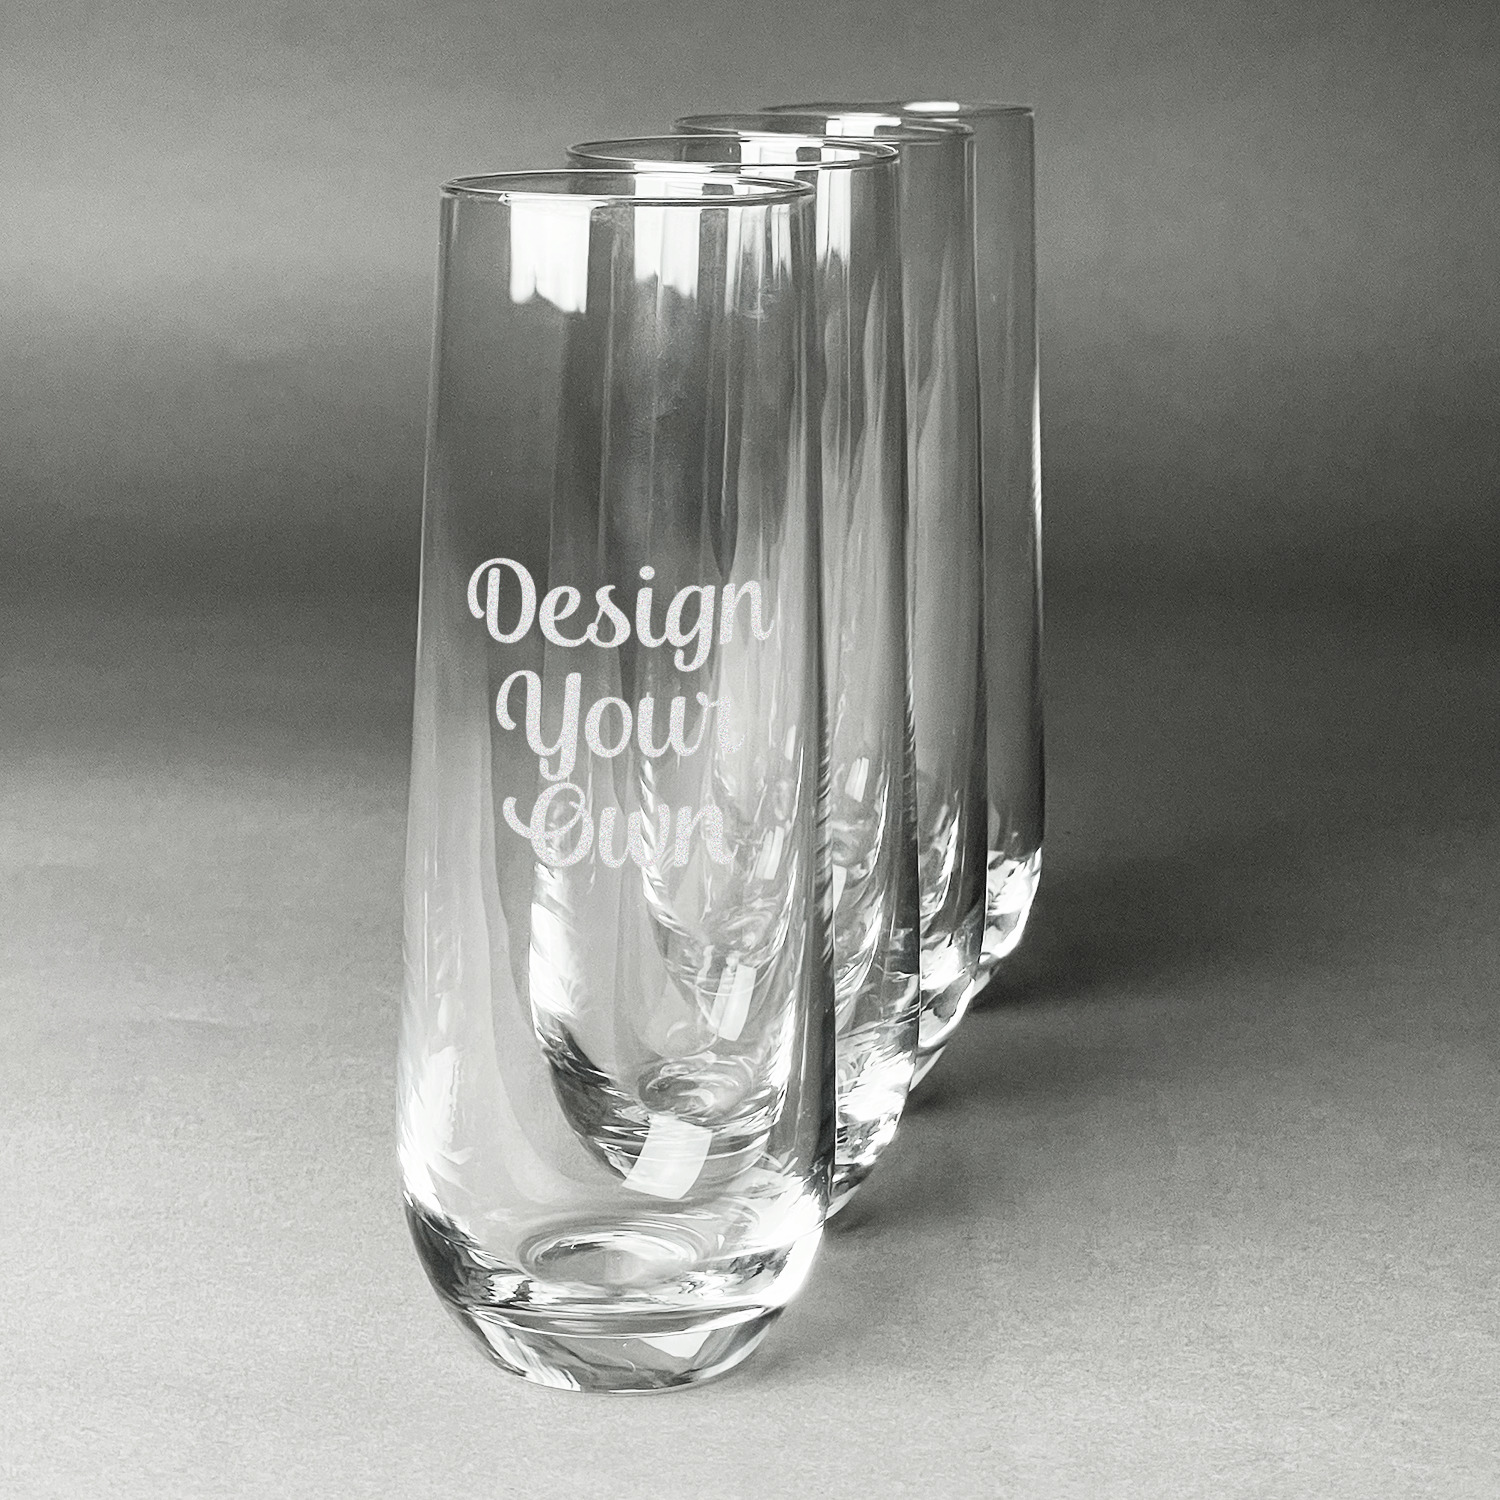 https://www.youcustomizeit.com/common/MAKE/965833/Design-Your-Own-Champagne-Flute-Set-of-4-Front-Main.jpg?lm=1666104573